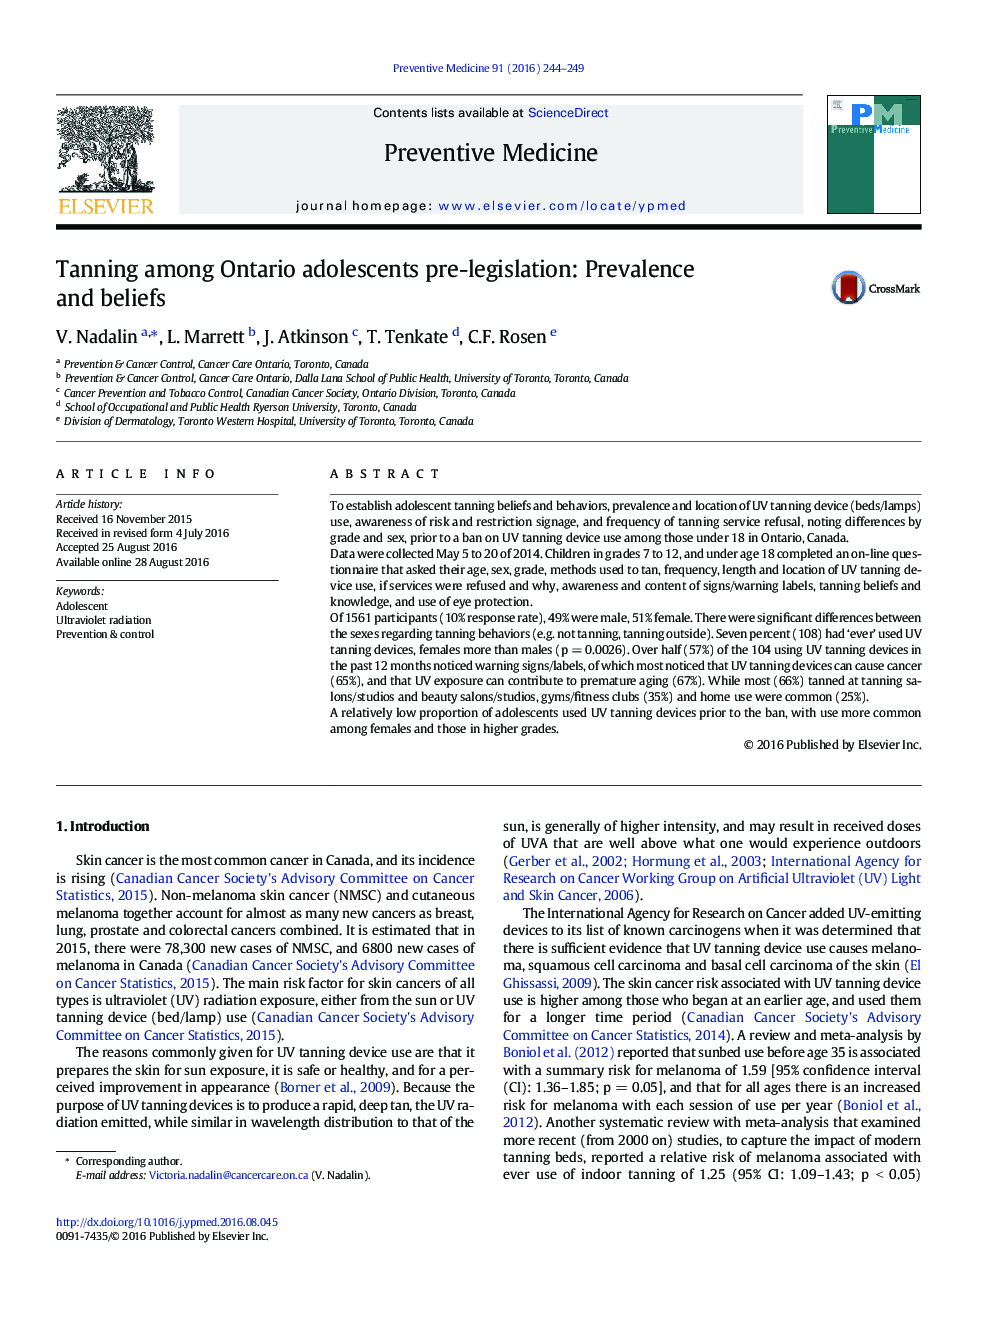 Tanning among Ontario adolescents pre-legislation: Prevalence and beliefs